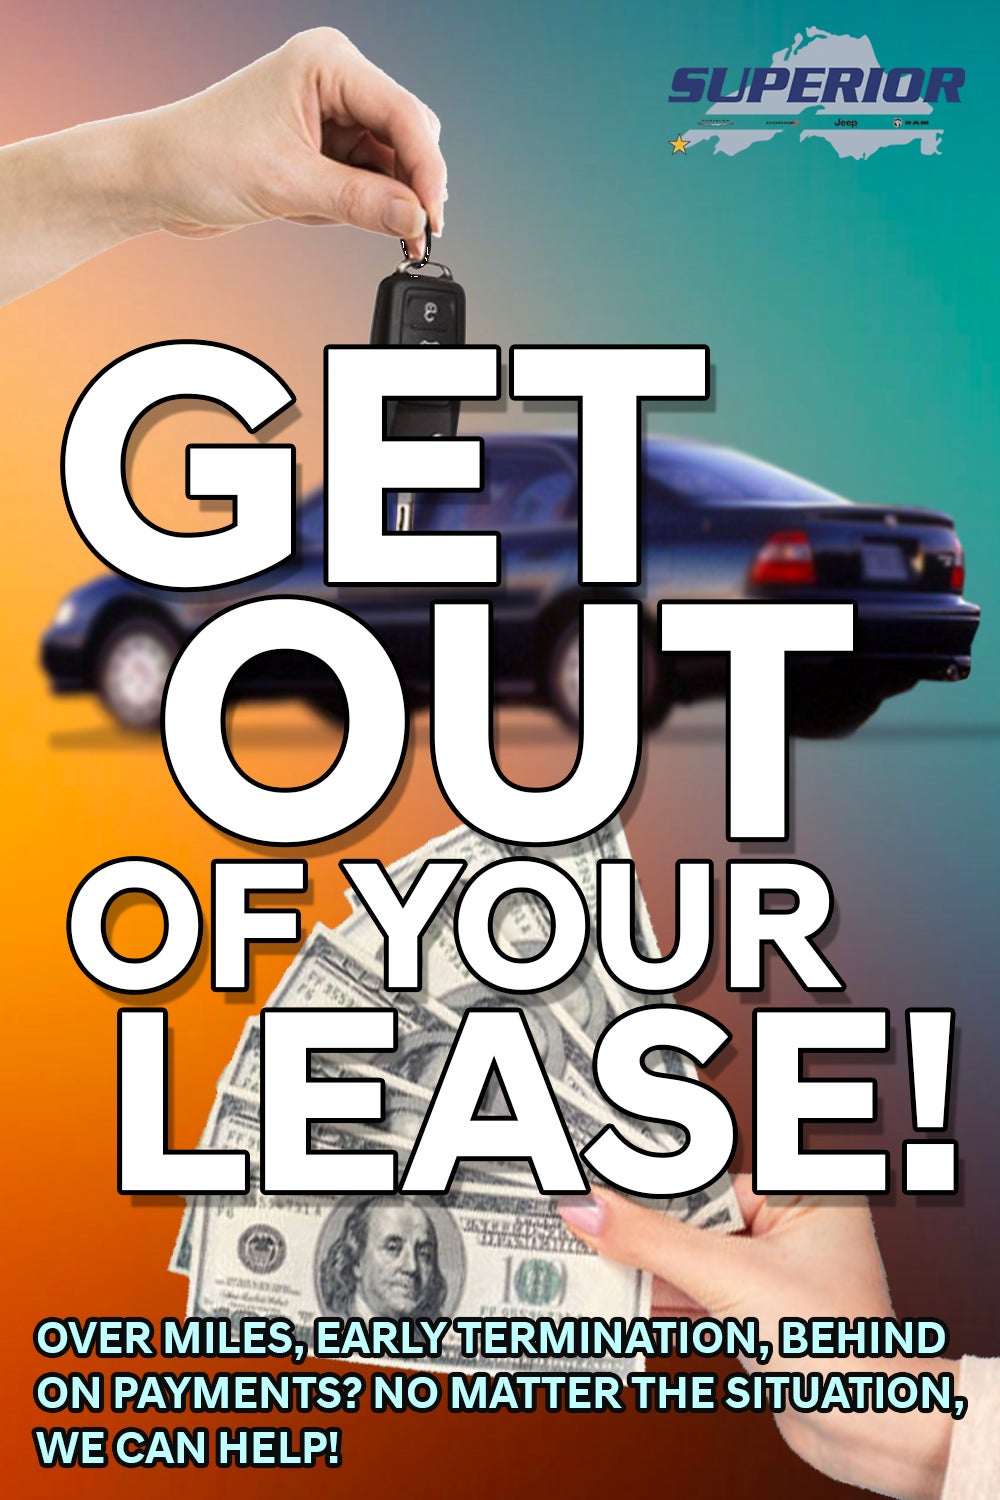 Get Out of Your Lease with Superior Chrysler Dodge Jeep Ram